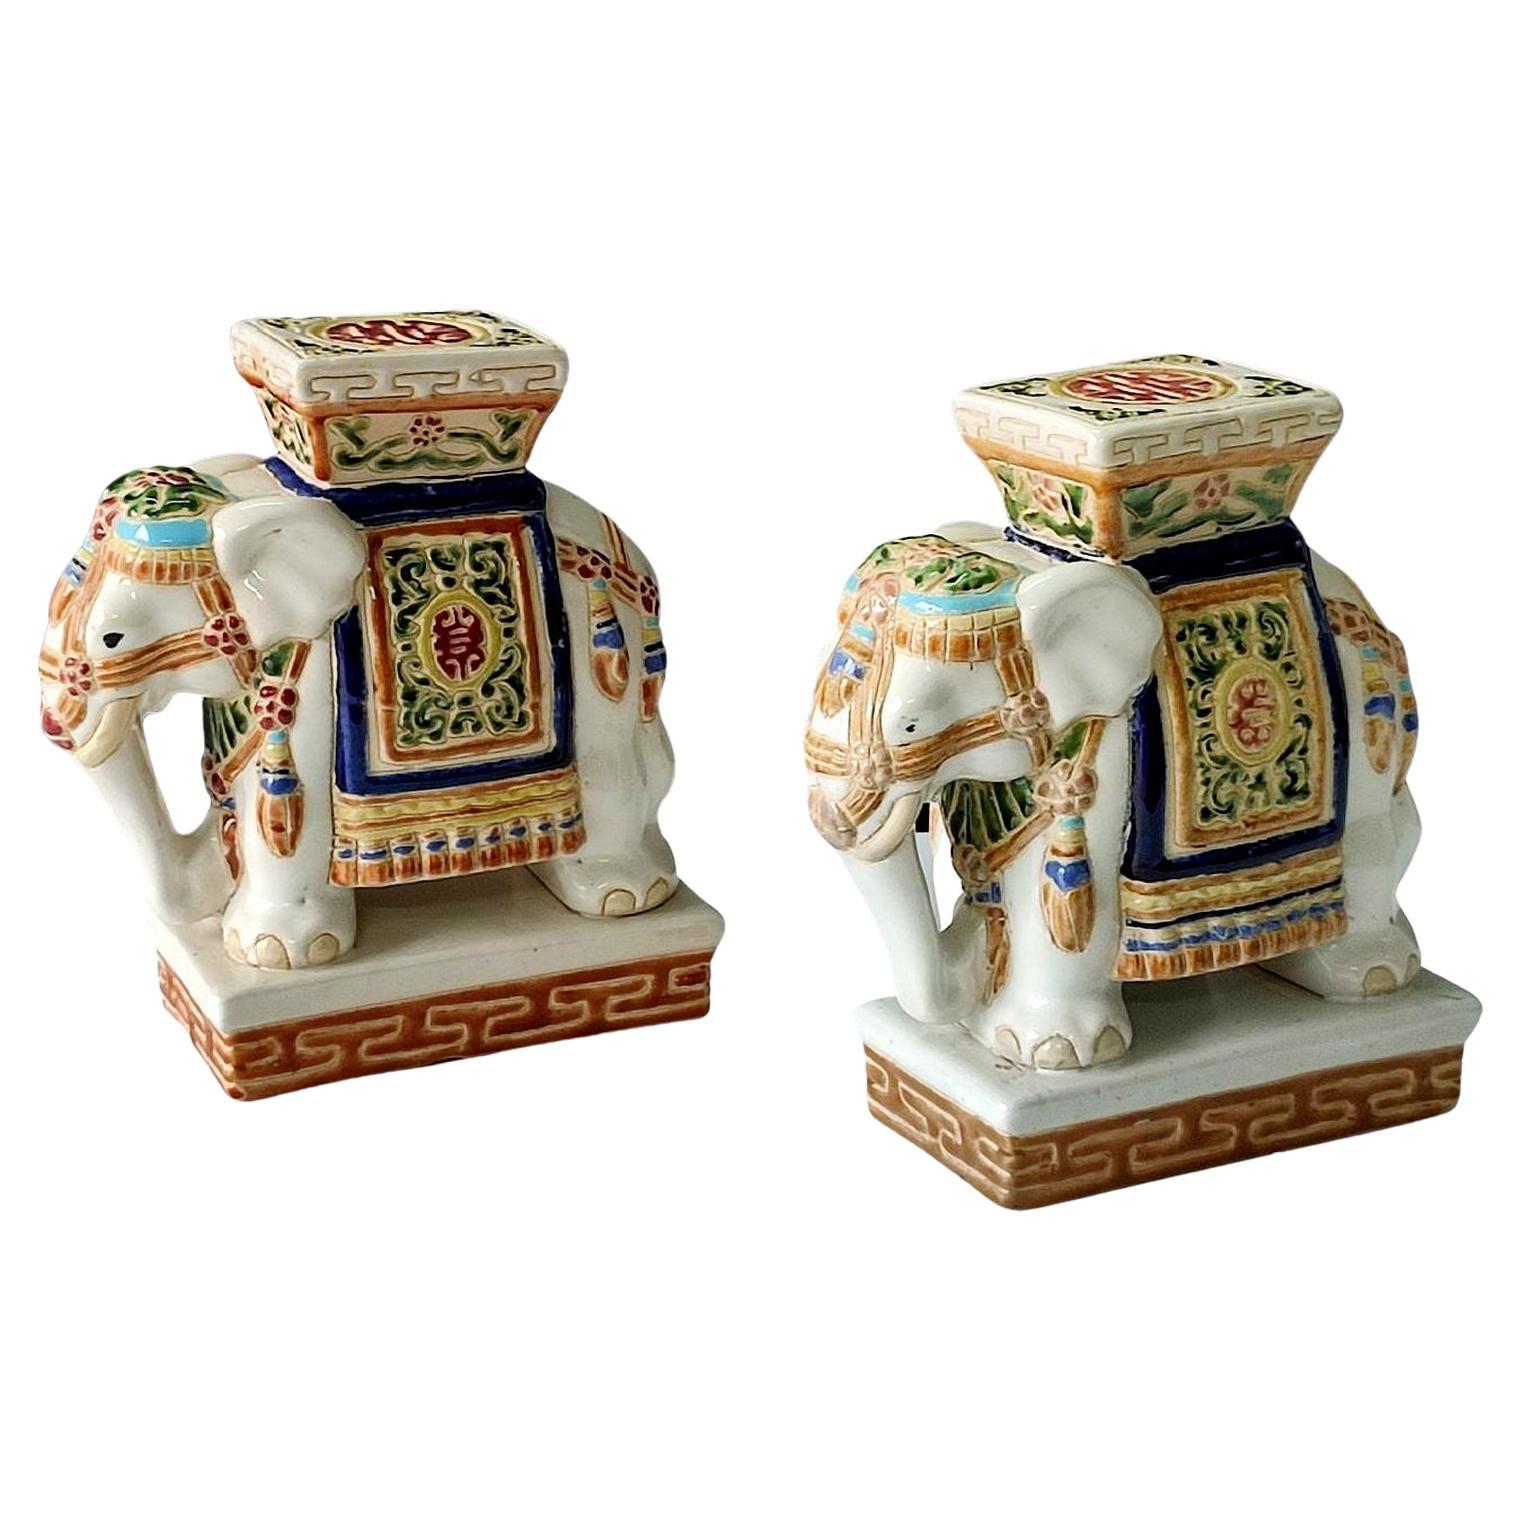 Pair of Polychrome Ceramic Elephant Plant Holder, Bookends, Mid 20th Century For Sale